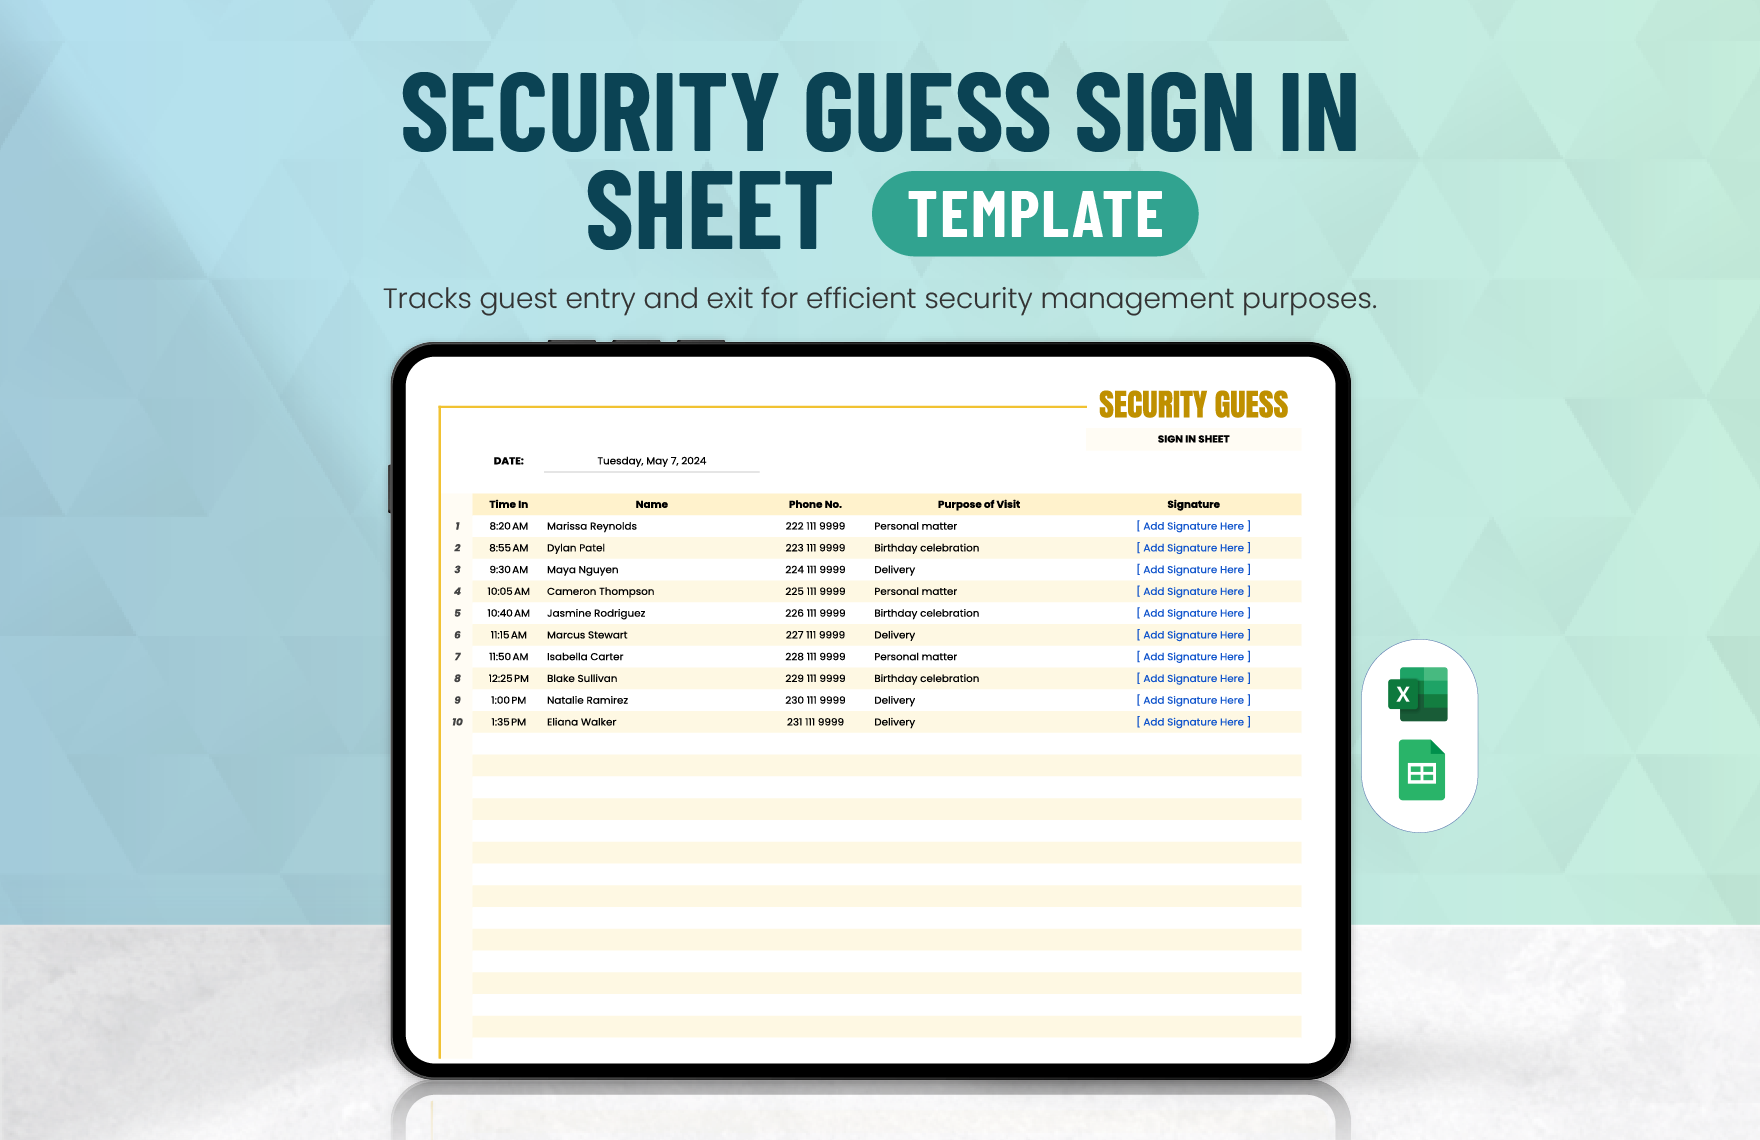 Security Guess Sign in Sheet Template